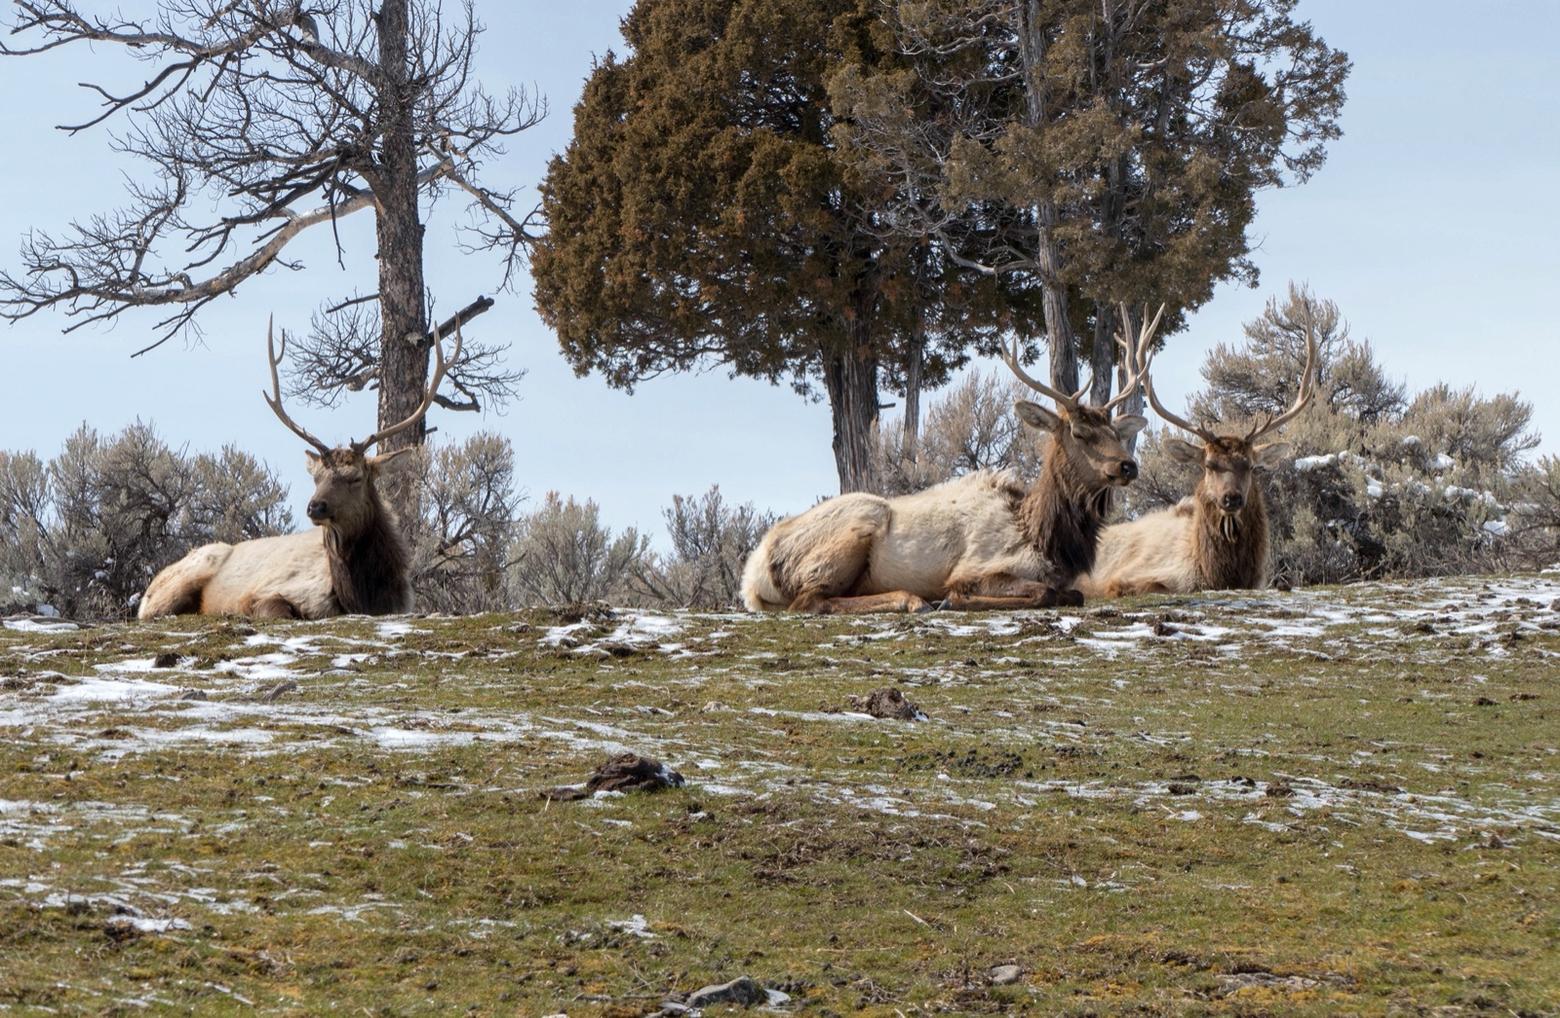 How will CWD impact wildlife in Yellowstone? Part of the park's CWD surveillance plan is identifying animals that appear ill or in physical distress. These bull elk are not sick with CWD but left haggard and fragile by a long hard winter.  Knowing whether an animal has CWD or is just weakened by the elements could prove difficult. Photo courtesy Diane Renkin/NPS